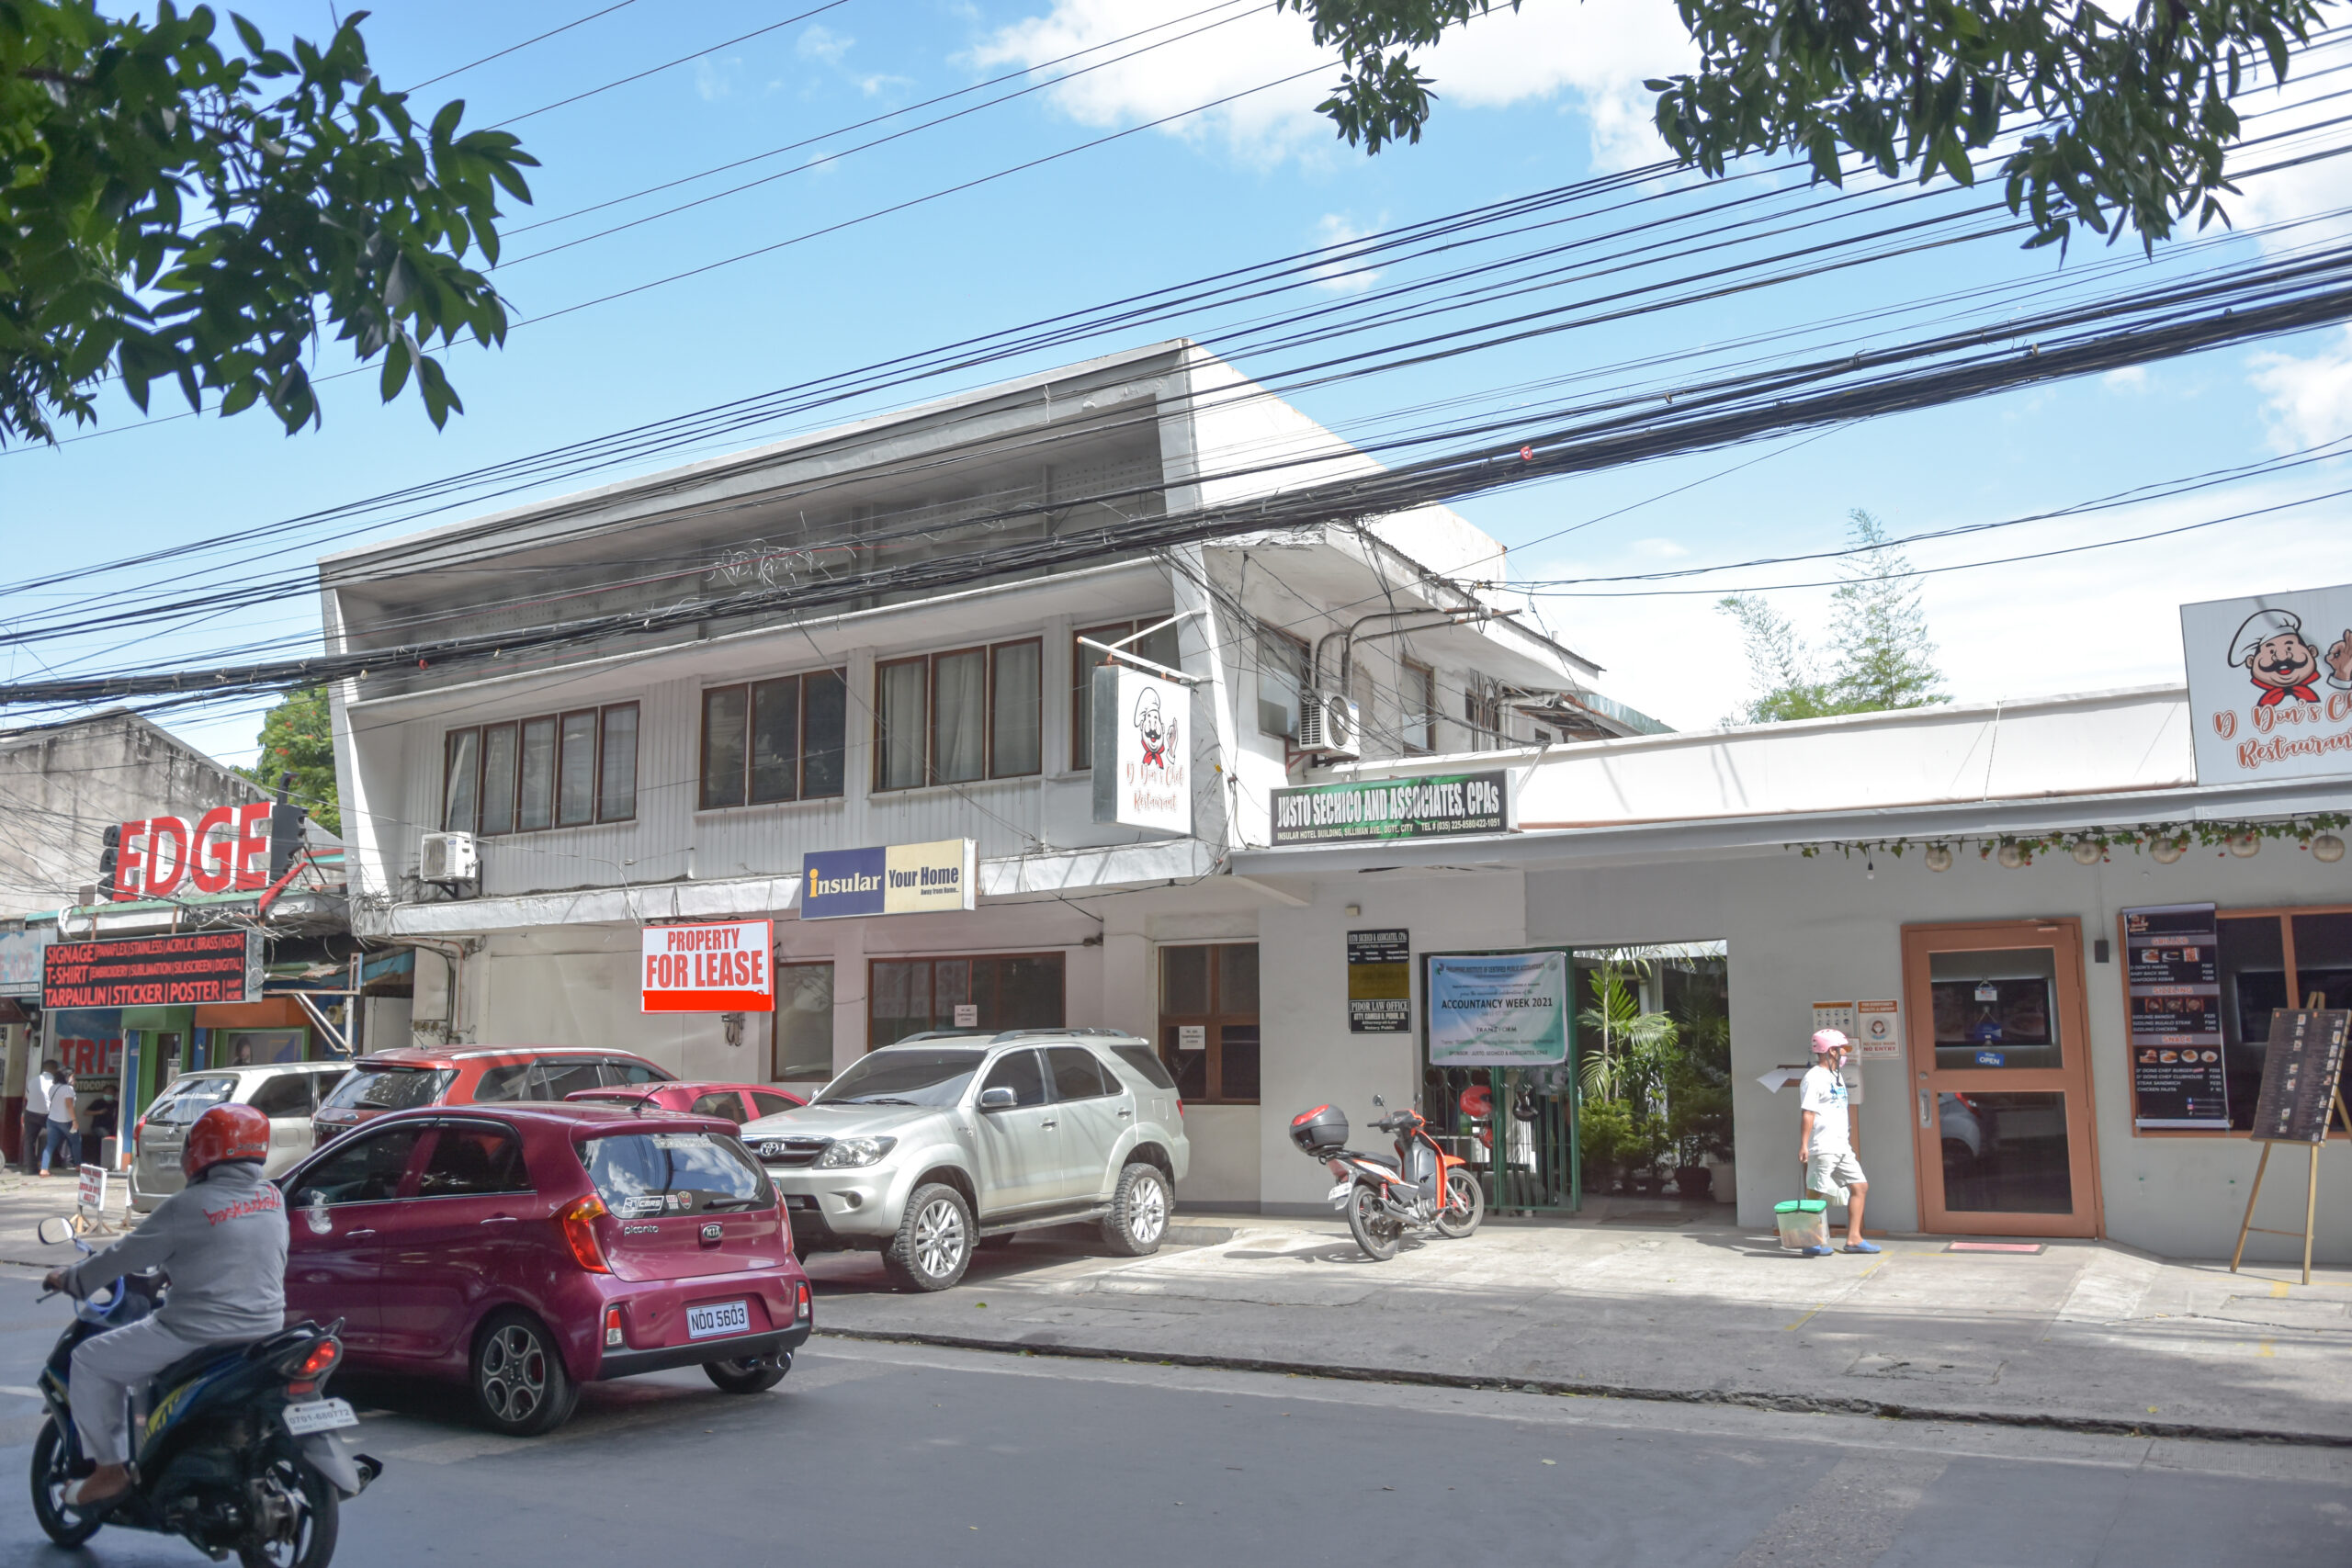 901sqm Commercial Space for Rent in Downtown Dumaguete